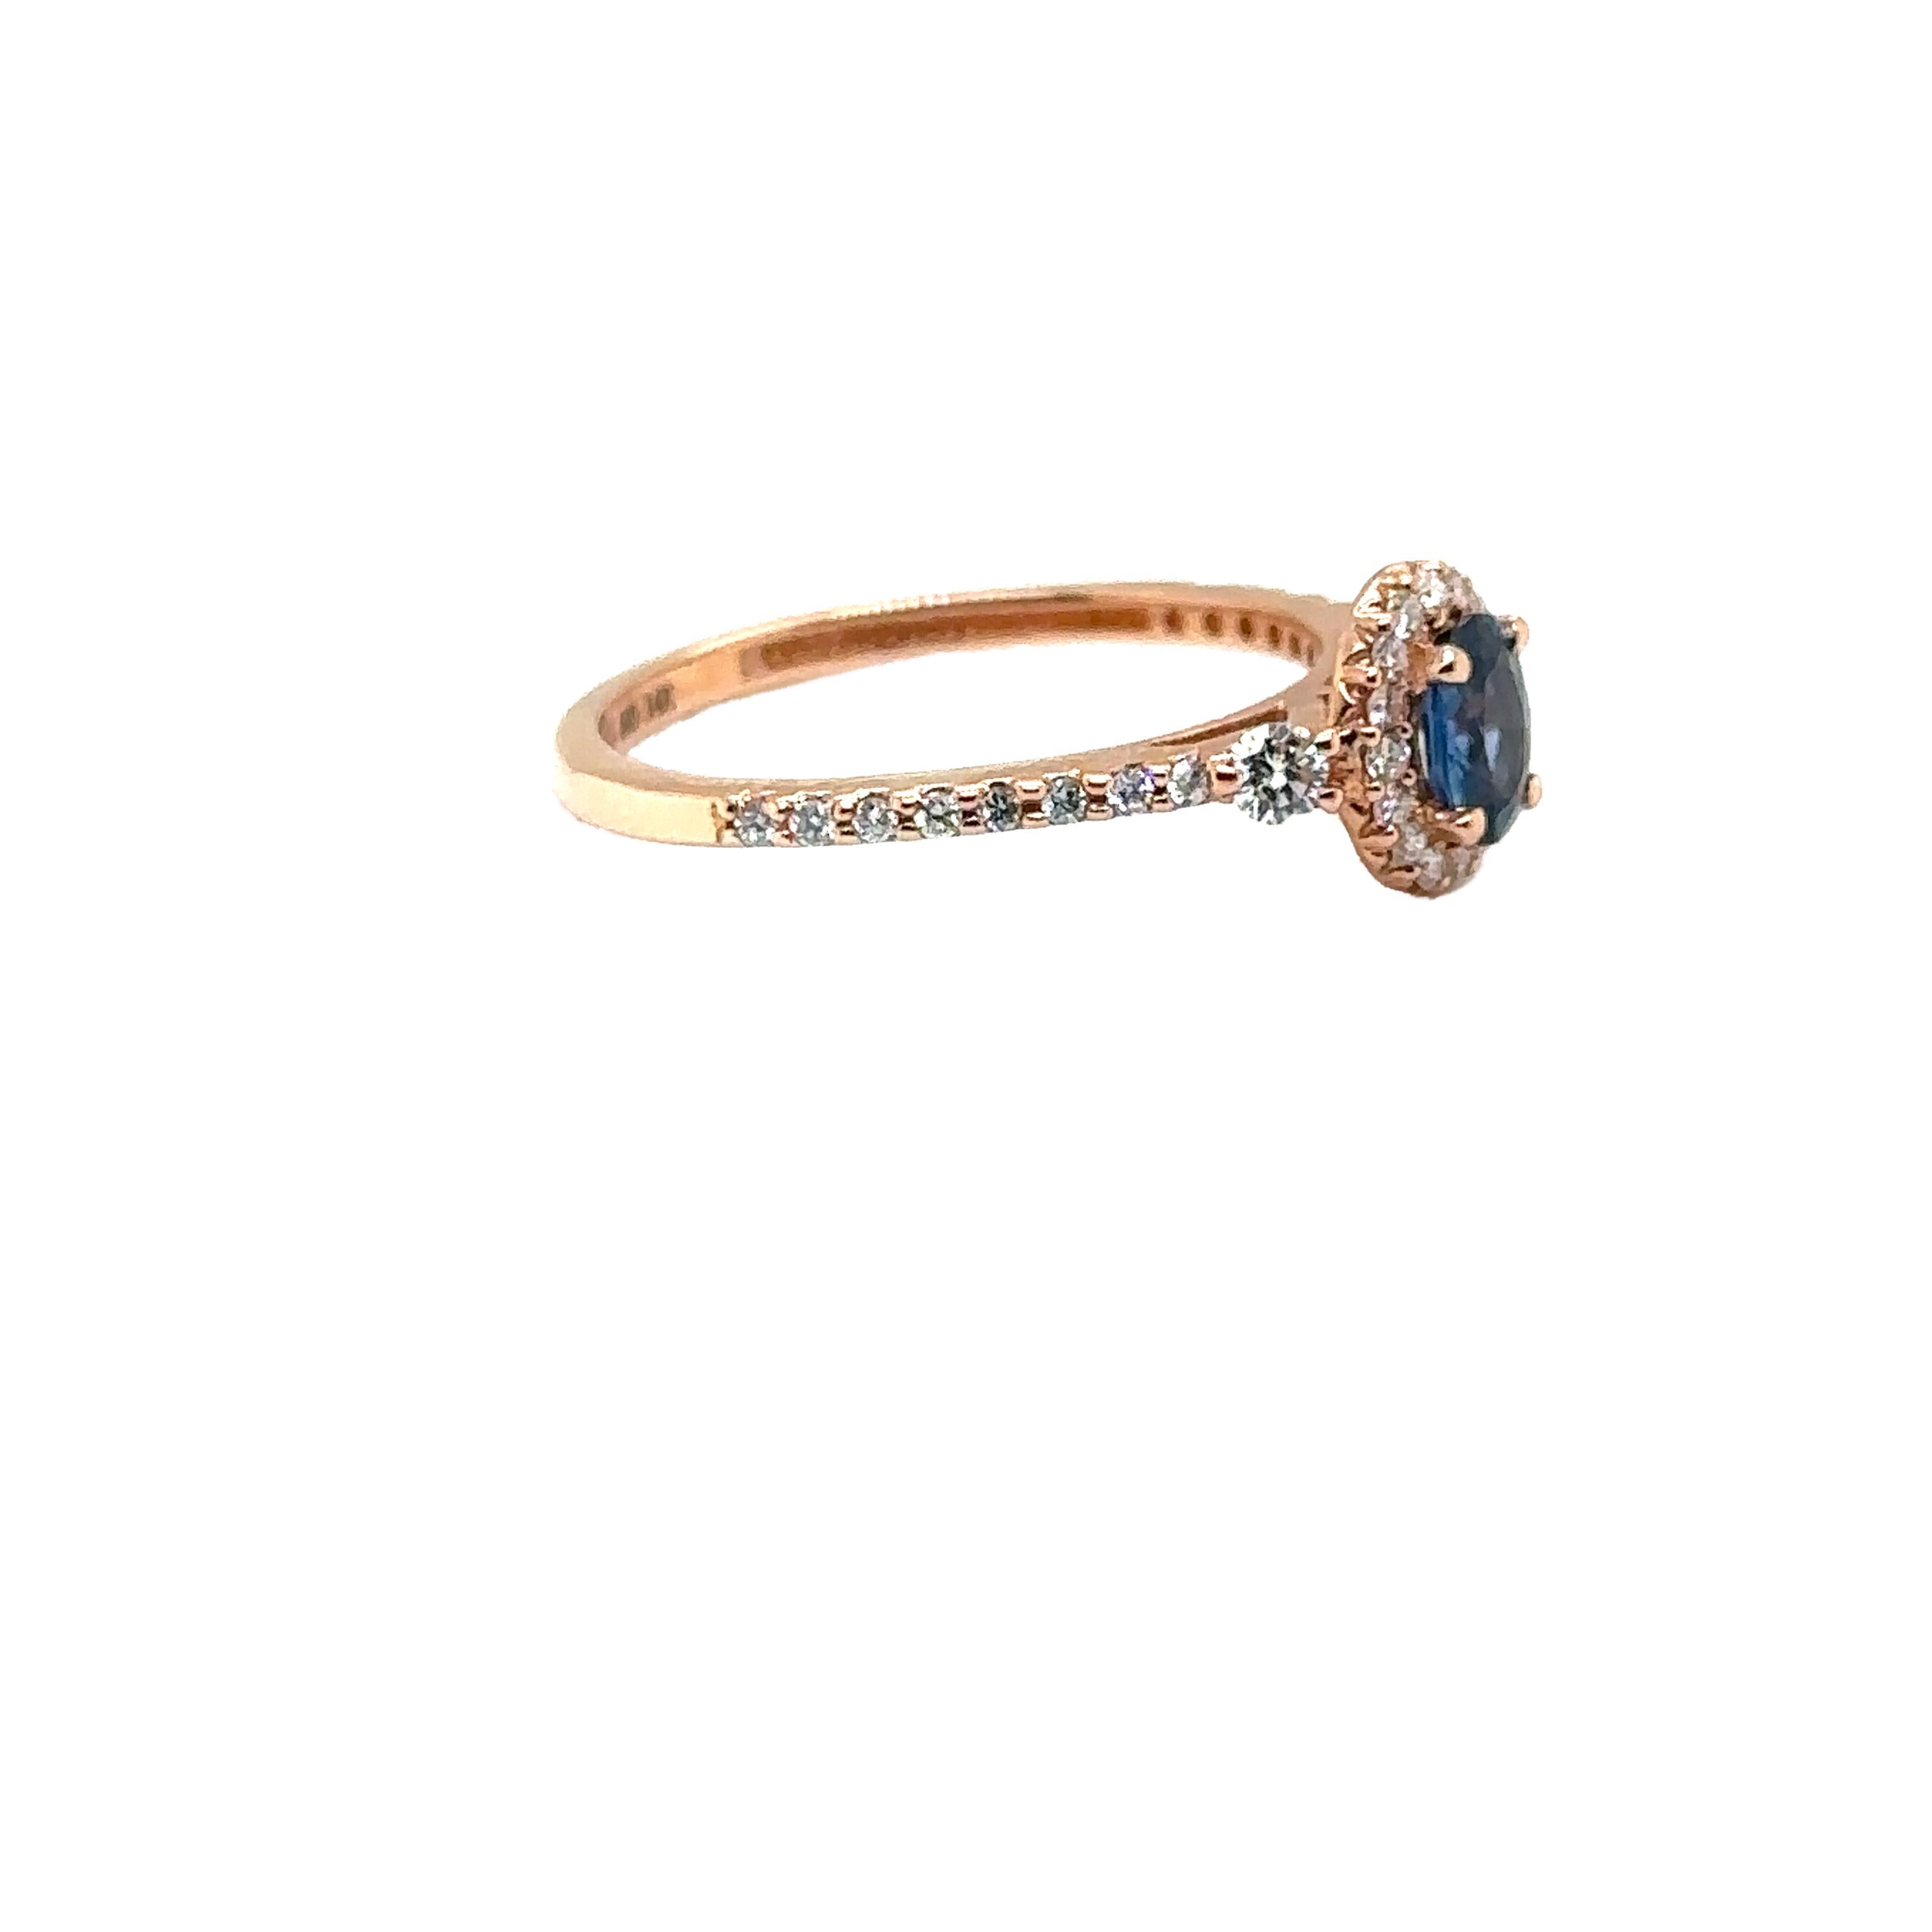 JAS-21-2238 - 14K ROSE GOLD OVAL SAPPHIRE RING with DIAMONDS For Sale 3